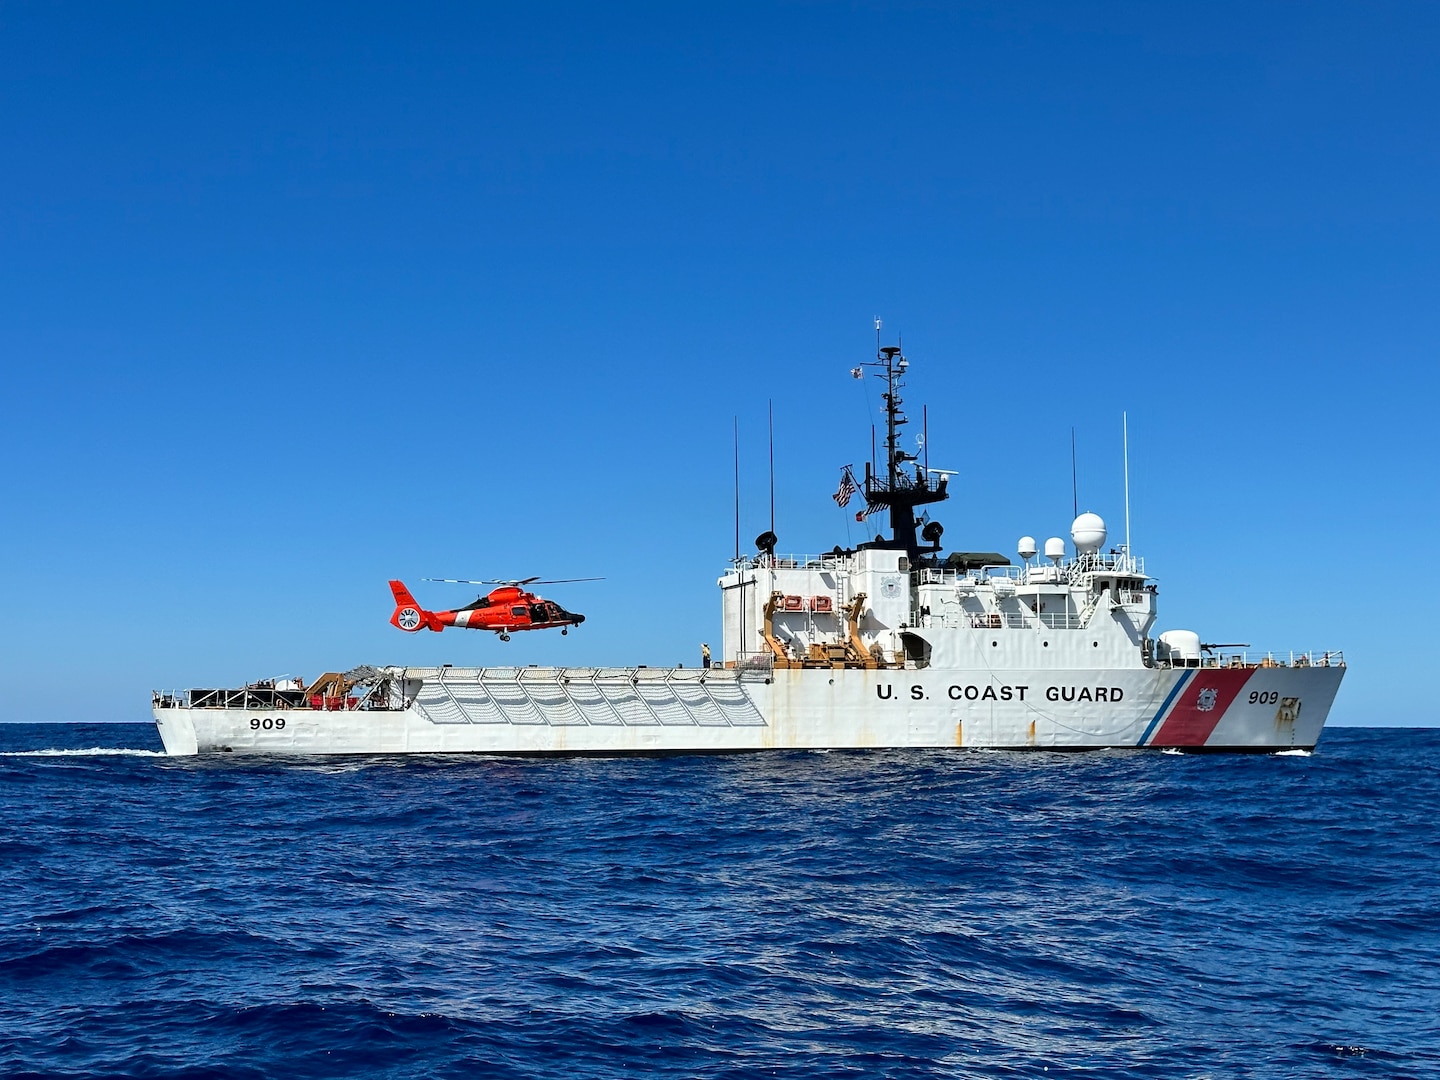 A U.S. Coast Guard MH-65 Dolphin helicopter crew lands on the flight deck of the Coast Guard Cutter Campbell (WMEC 909), Feb. 8, in the North Pacific Ocean. Campbell is a 270-foot, Famous-class medium endurance cutter. The cutter's primary missions are counter-narcotics, migrant interdiction, living marine resources protection, and search and rescue in support of U.S. Coast Guard operations throughout the Western Hemisphere.